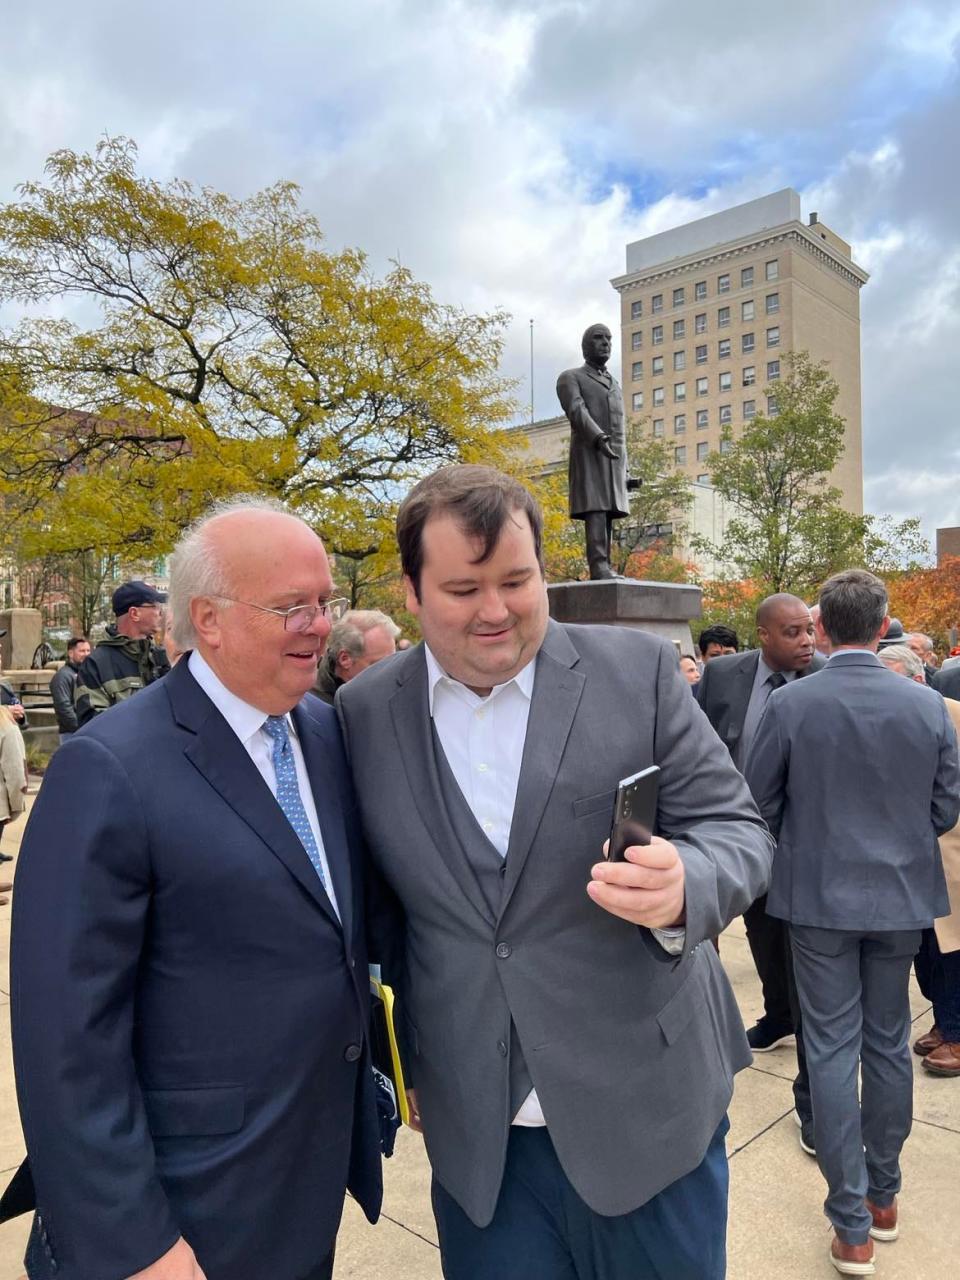 Karl Rove, left, takes a selfie photo with an attendee at the Saturday unveiling of a President William McKinley statue in front of the Stark County Courthouse in downtown Canton. Rove is a former White House official and presidential historian and author.